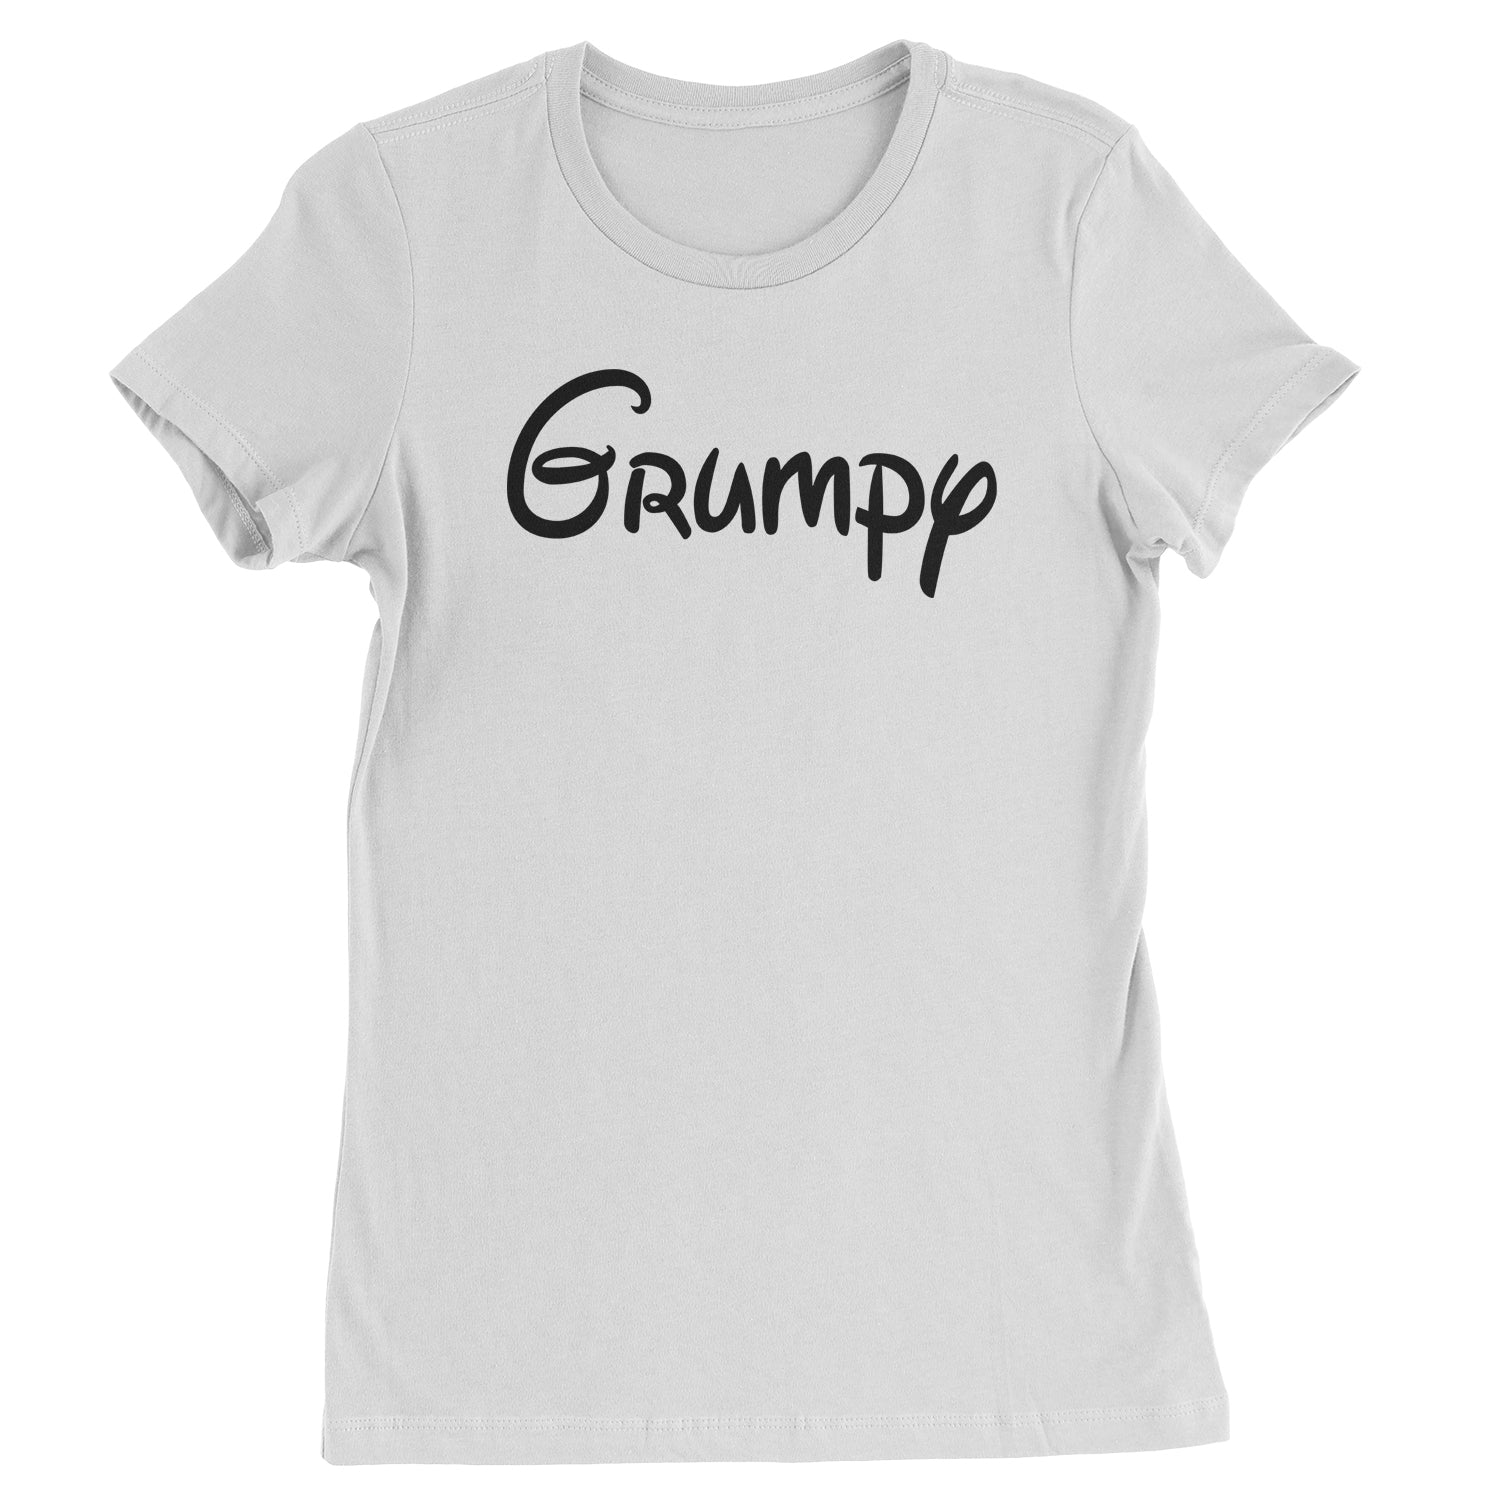 Grumpy - 7 Dwarfs Costume Womens T-shirt and, costume, dwarfs, group, halloween, matching, seven, snow, the, white by Expression Tees